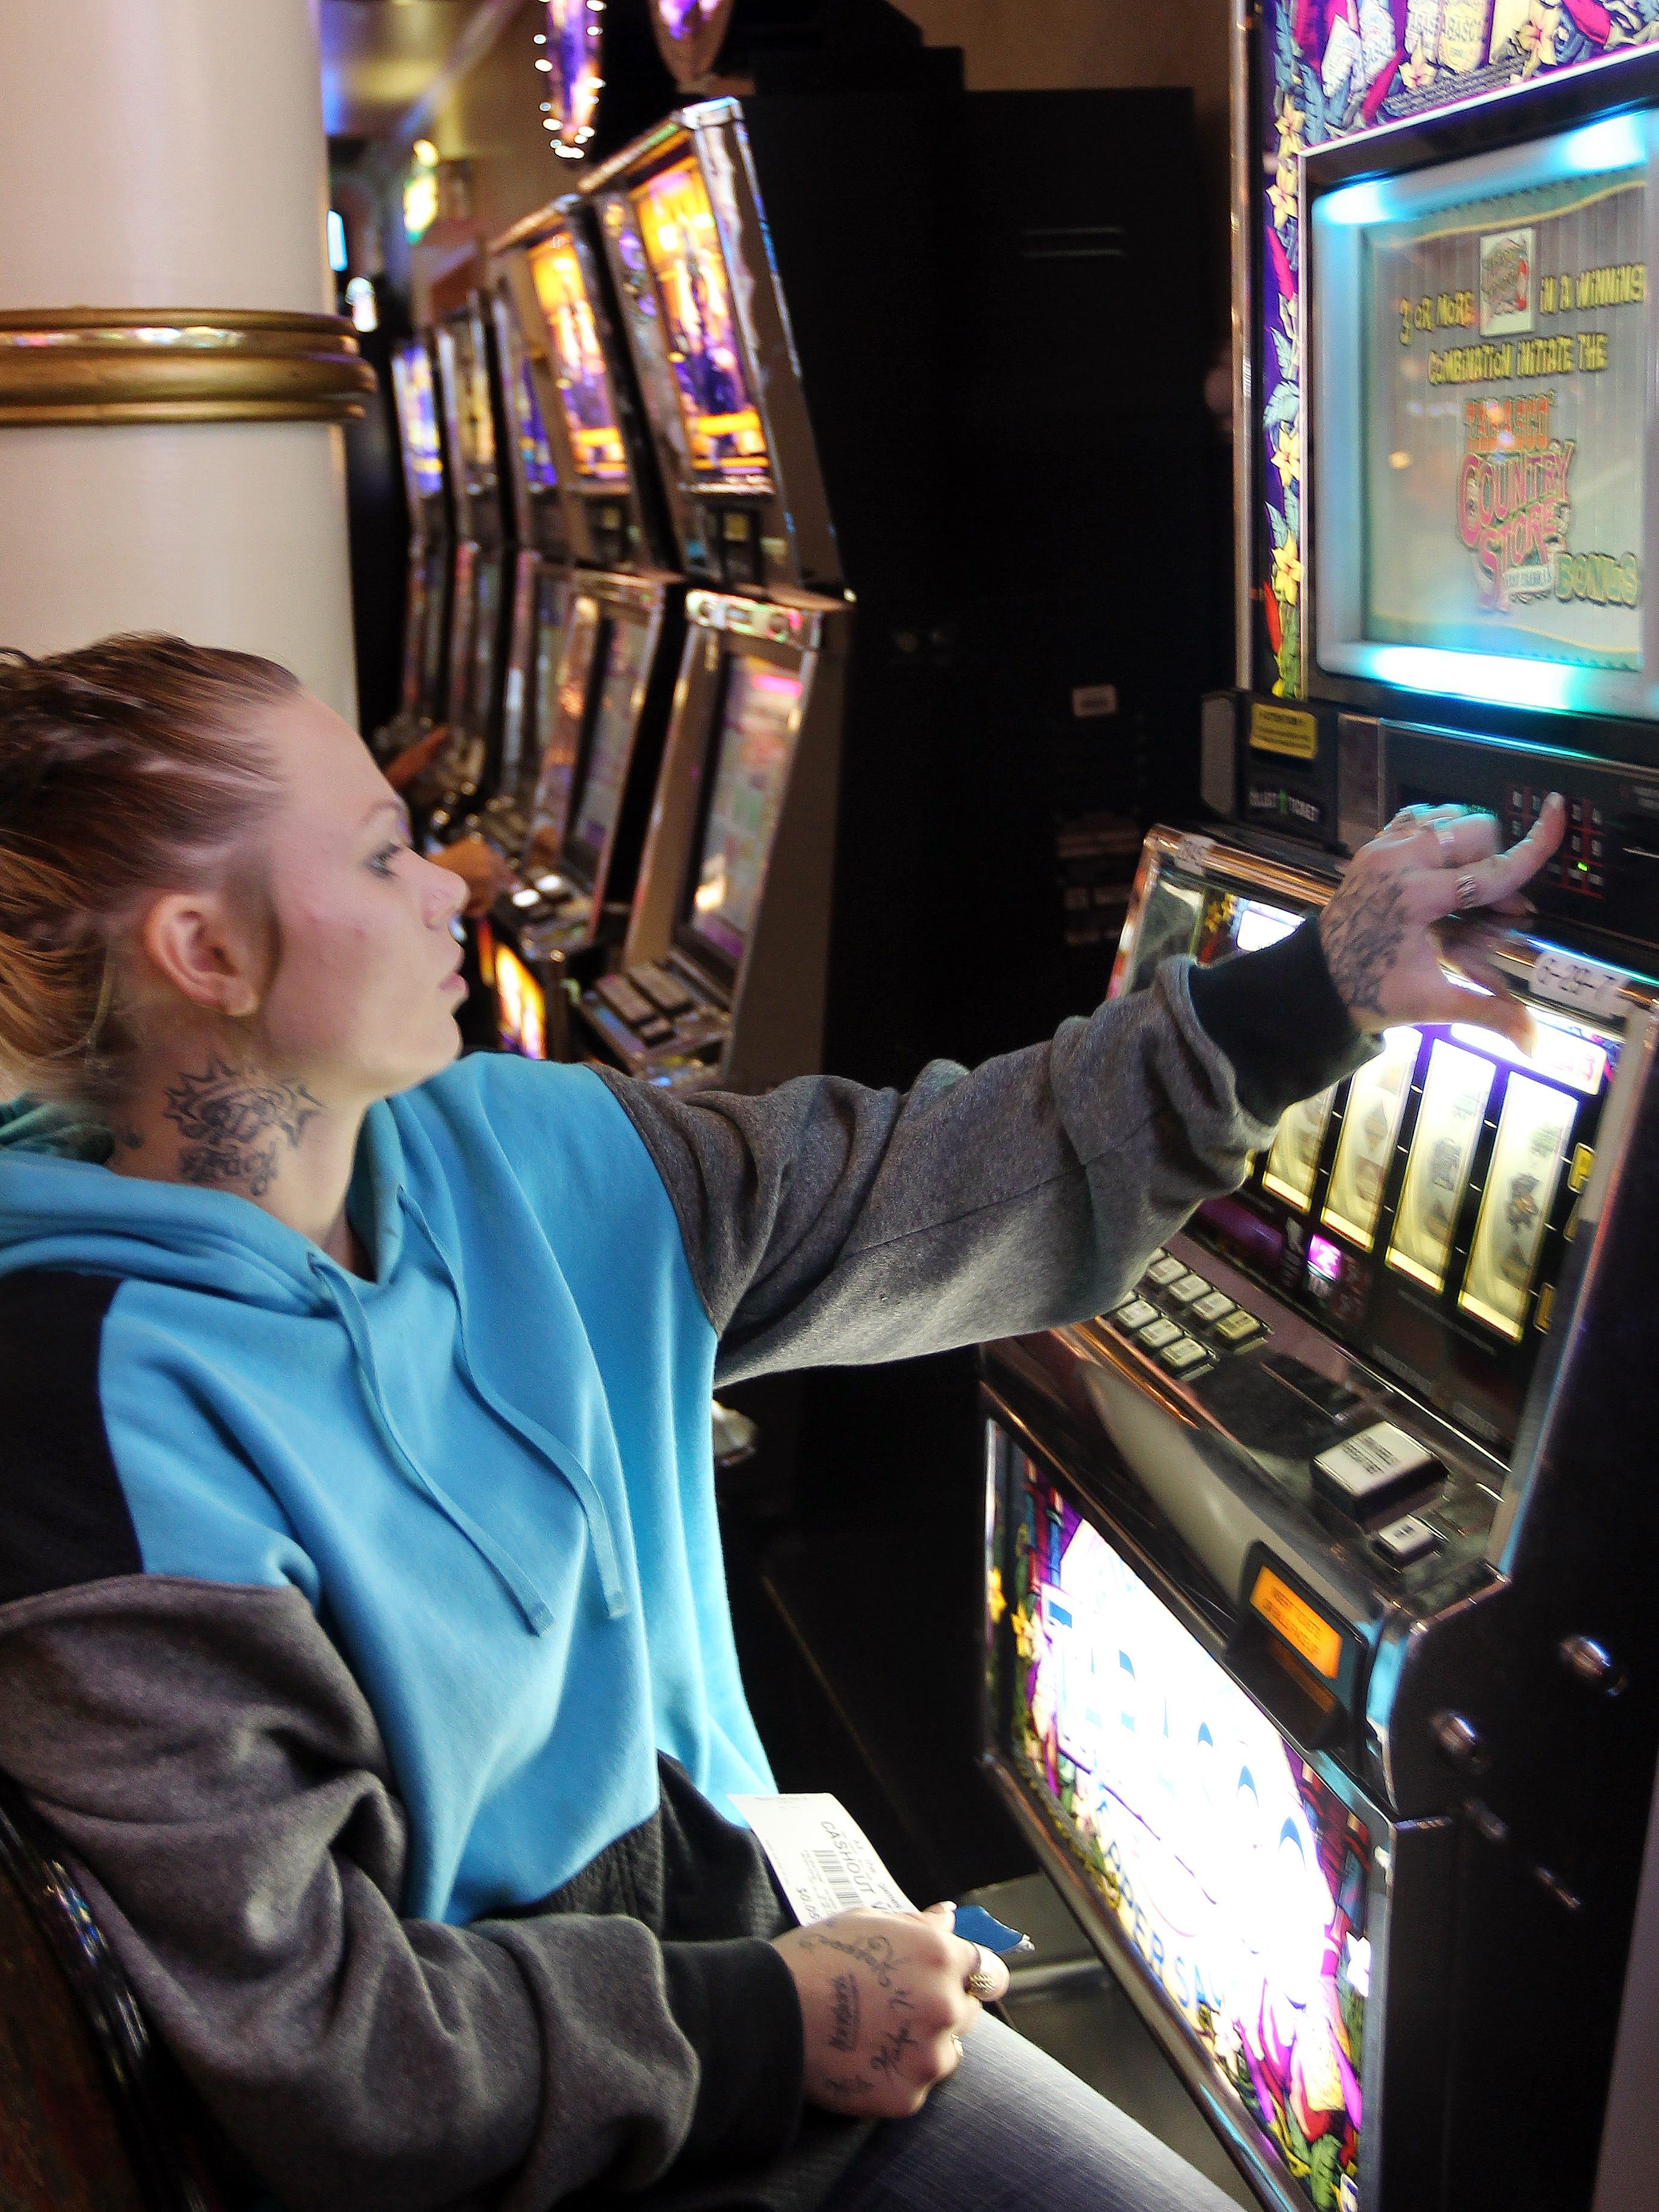 Kaylee Ledbetter, 23, of Indianapolis, plays the slot machines at Rising Star Casino, Rising Sun, IN. The Enquirer/Patrick Reddy